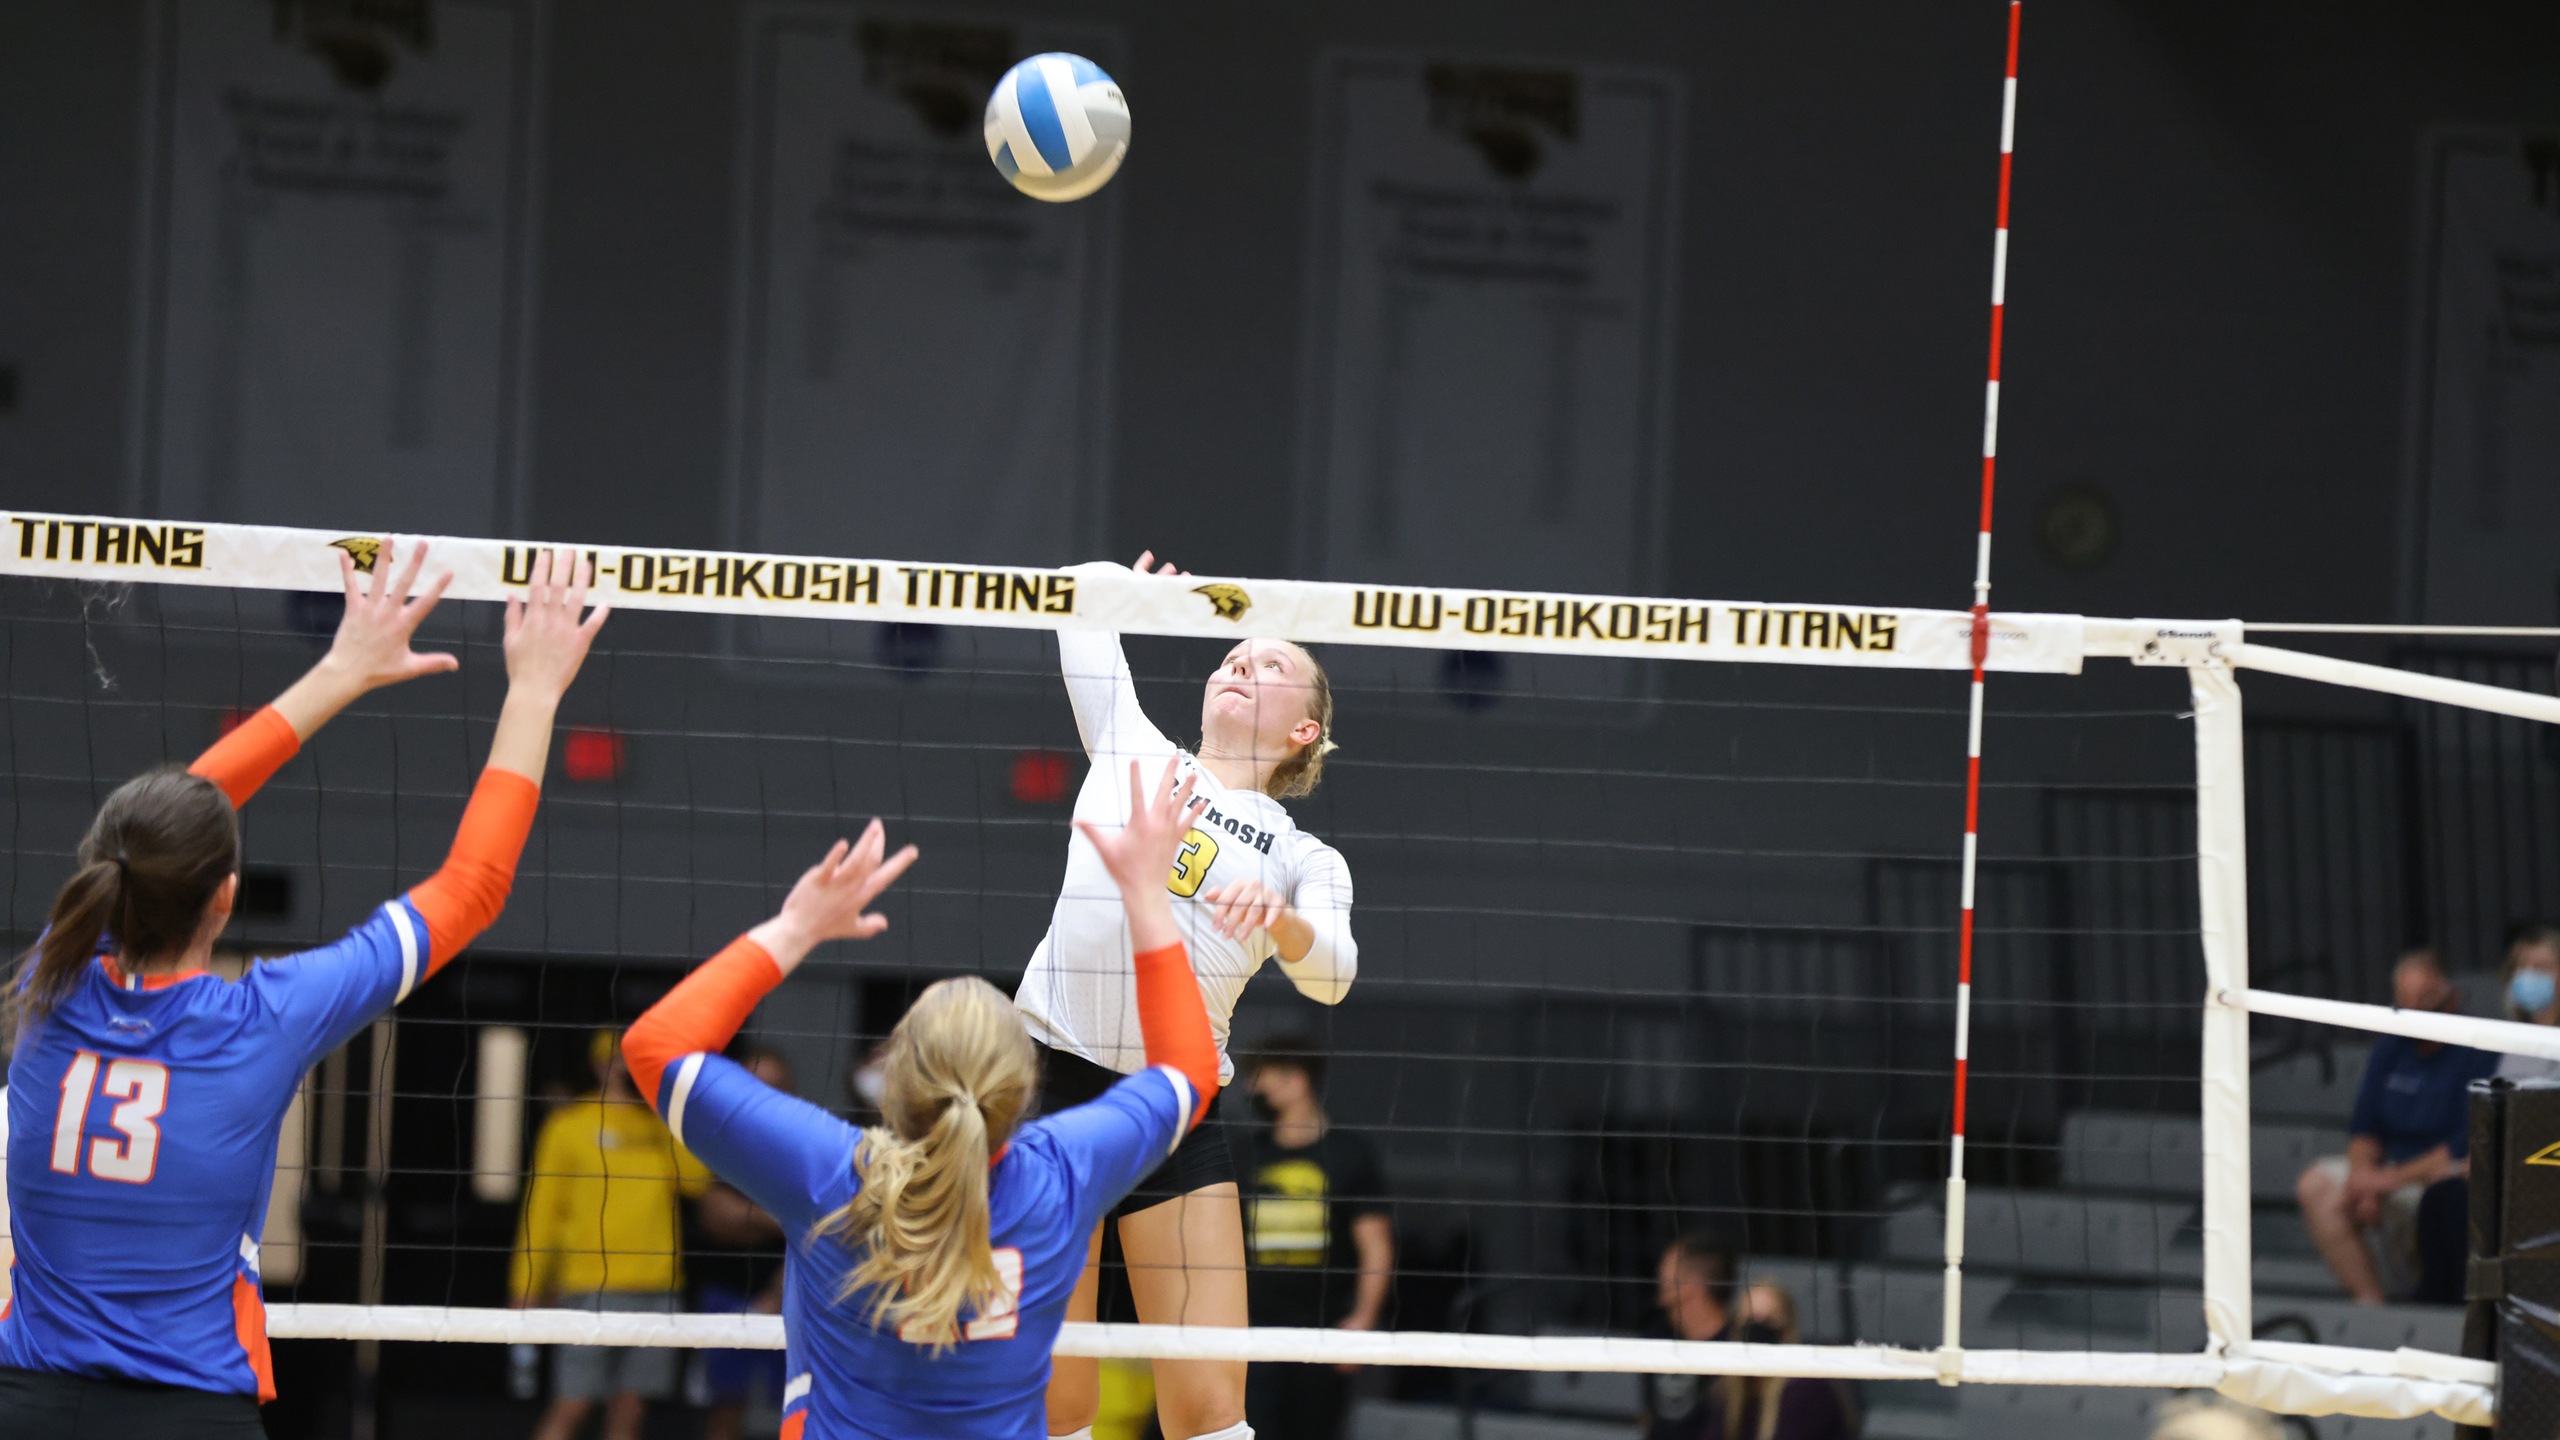 Carissa Sundholm's 26 kills on the night featured 15 during the Titans' win over Elmhurst College.